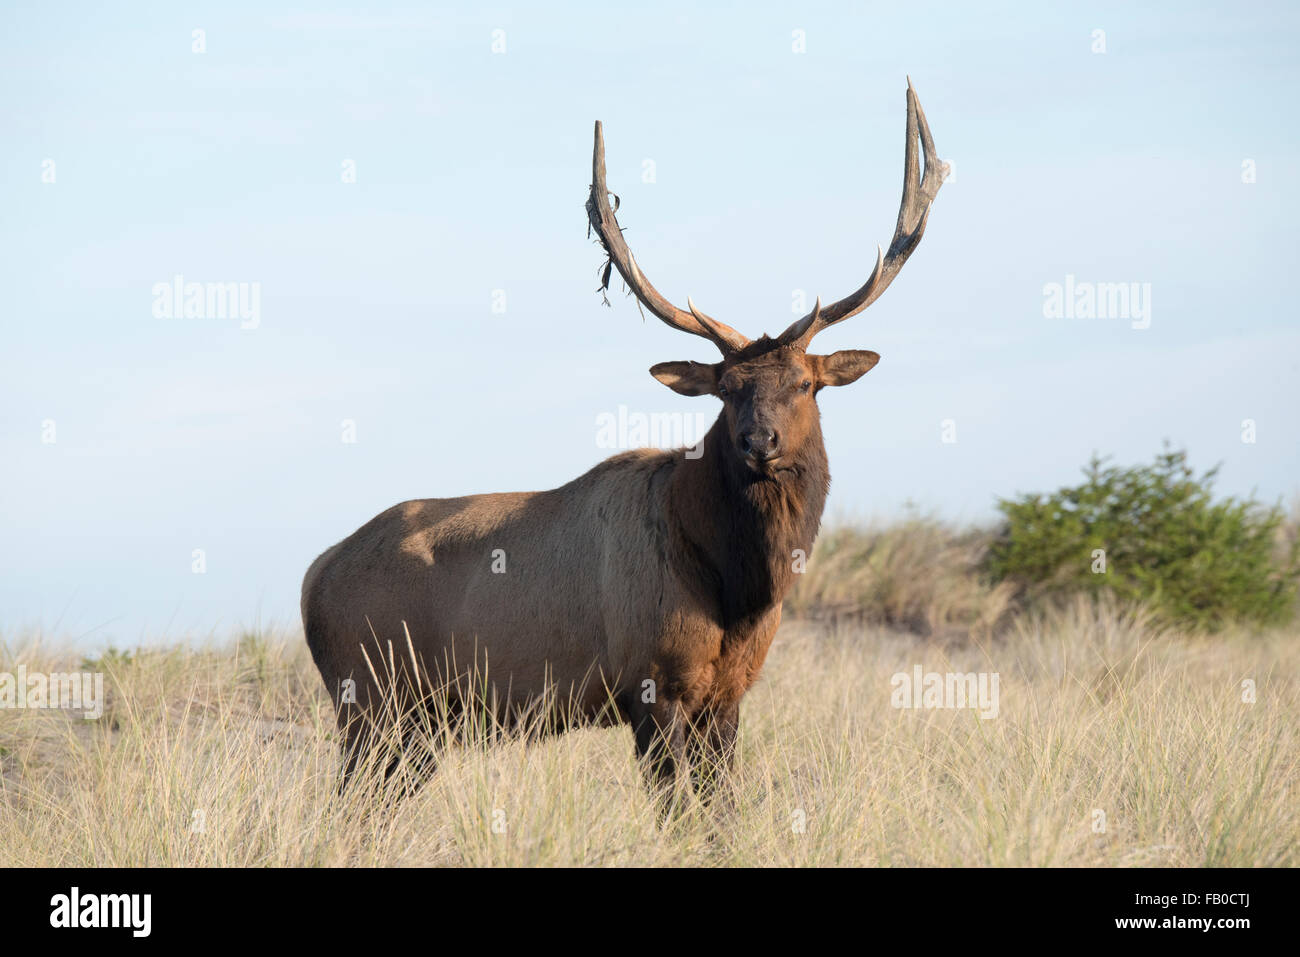 An elk passes on the sandy beach and dunes near Gold Bluffs Beach Campground at Prairie Creek Redwoods State Park in California. Stock Photo